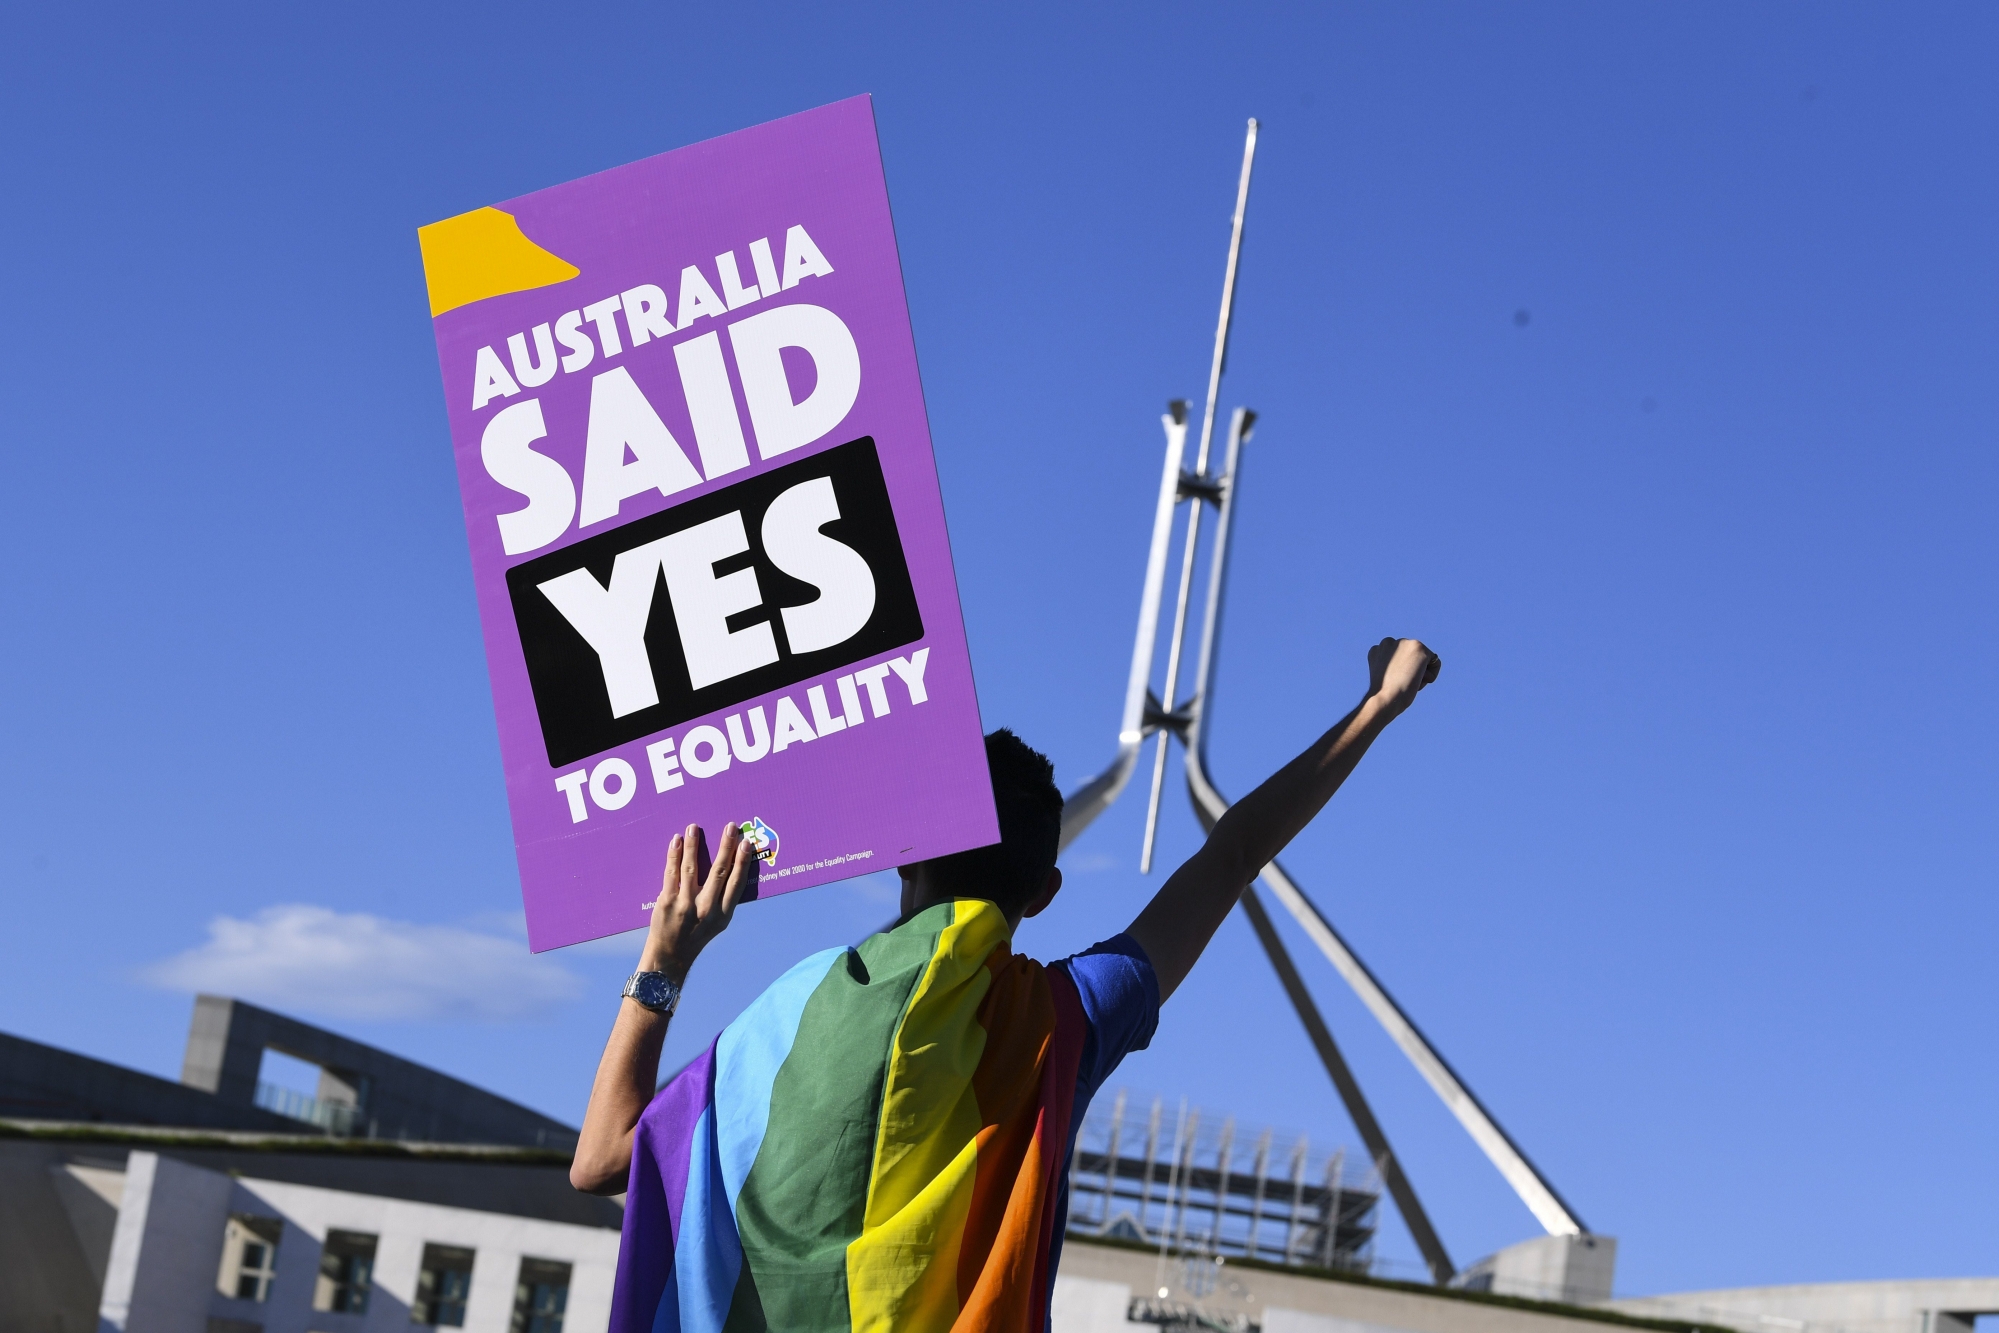 epa06372885 A same-sex marriage campaigner poses for pictures during an equality rally outside Parliament House in Canberra, Australian Capital Territory, Australia, 07 December 2017.  A bill allowing same-sex couples to marry could see its historic pass on the day as the Australian parliament is on its final sitting.  EPA/LUKAS COCH  AUSTRALIA AND NEW ZEALAND OUT AUSTRALIA EQUALITY CAMPAIGN RALLY